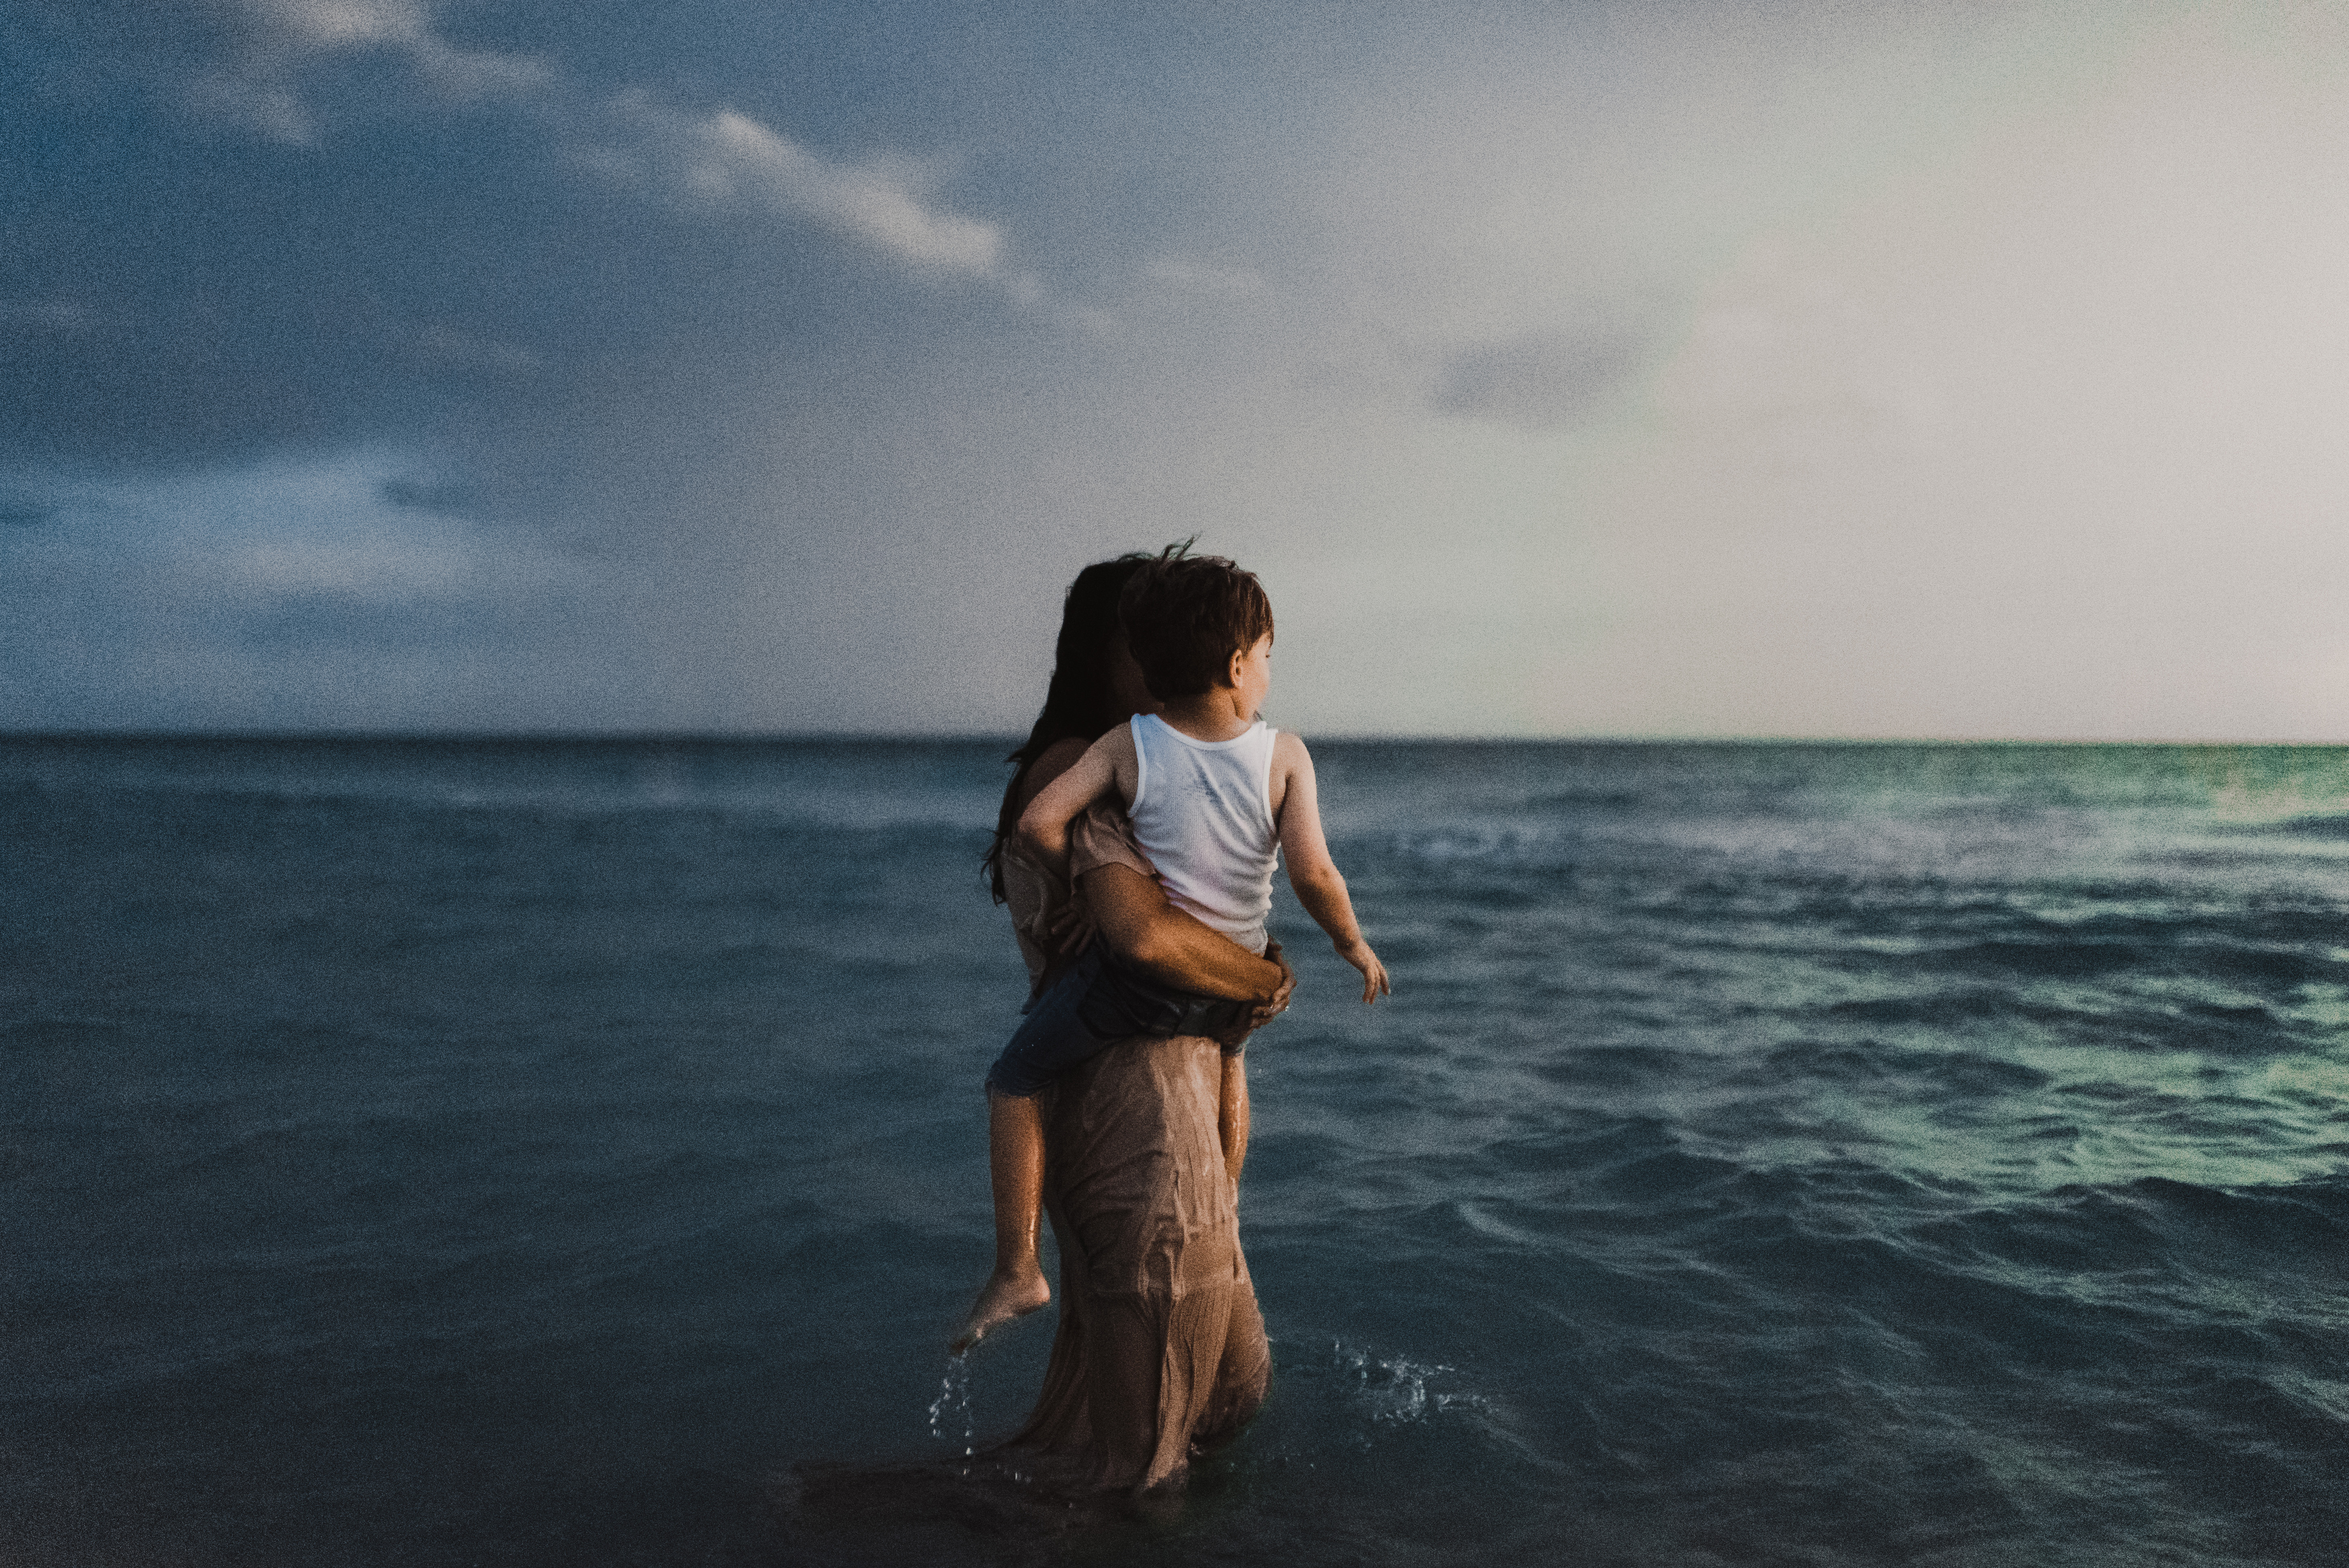 Family Photographer in Chicago, IL, Photo by Elle Baker Photography, Laurie Baker carries son into ocean